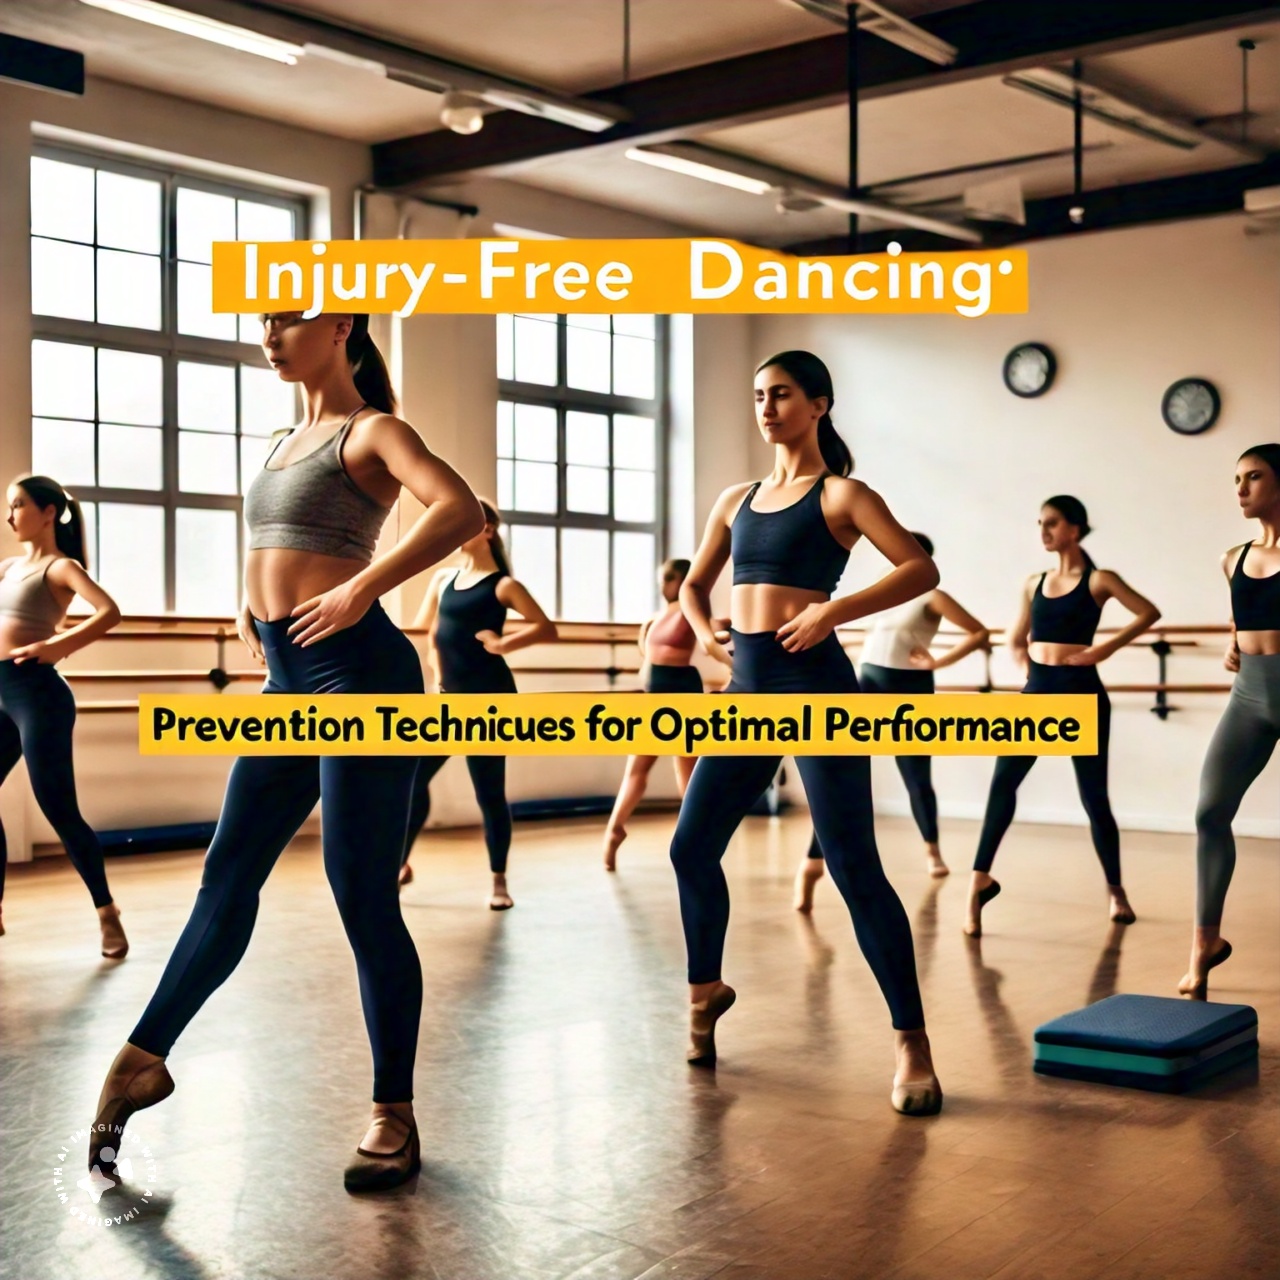 Injury-Free Dancing: Prevention Techniques for Optimal Performance